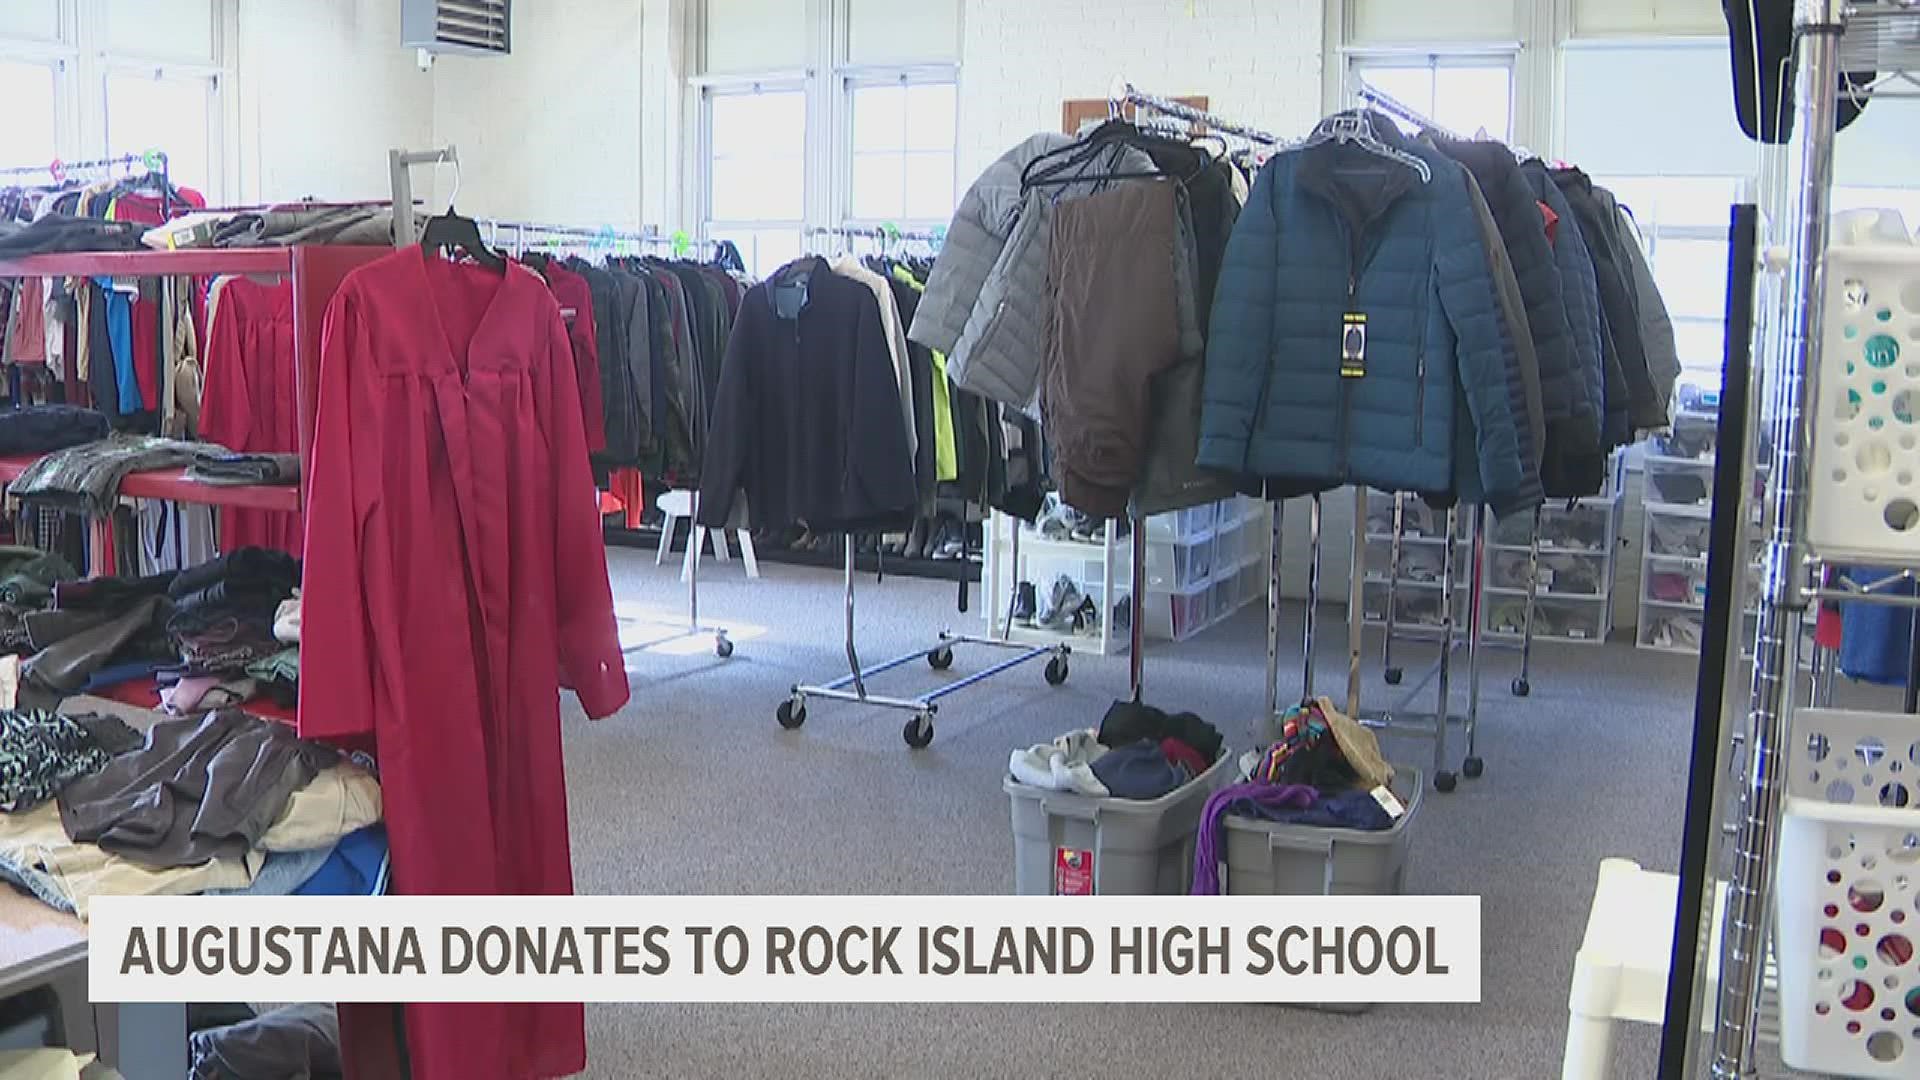 Rocky's Resource Room provides high school students and families with necessities, including toiletries, clothes, bags and more.